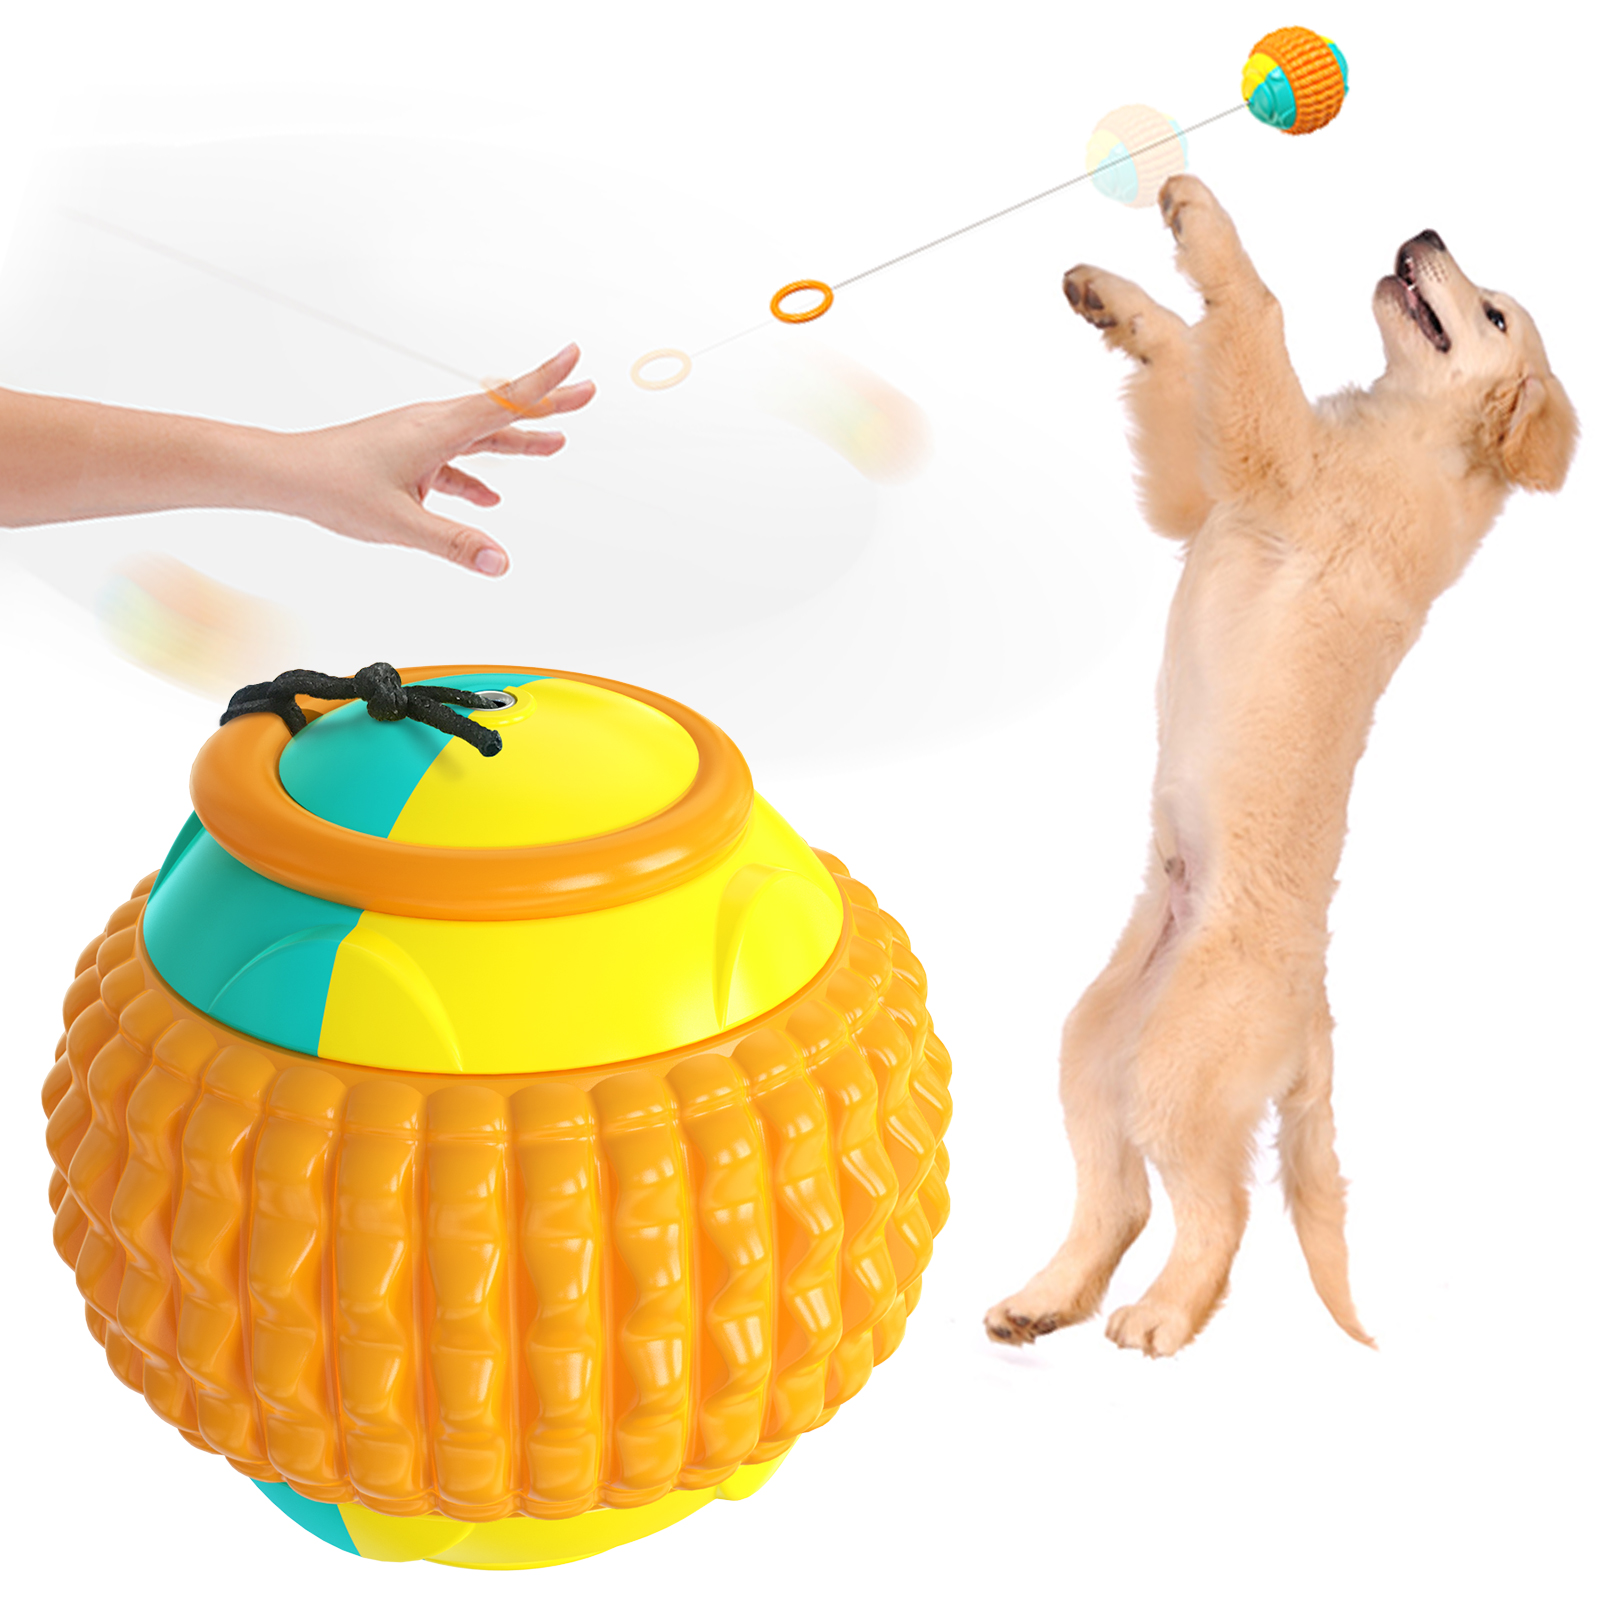 Dog Toy Pumpkin Shaped Hand Toss Elastic Drawstring Molar Tooth Cleaning Resistance To Bite Dog Training Toy Ball for Large Dog